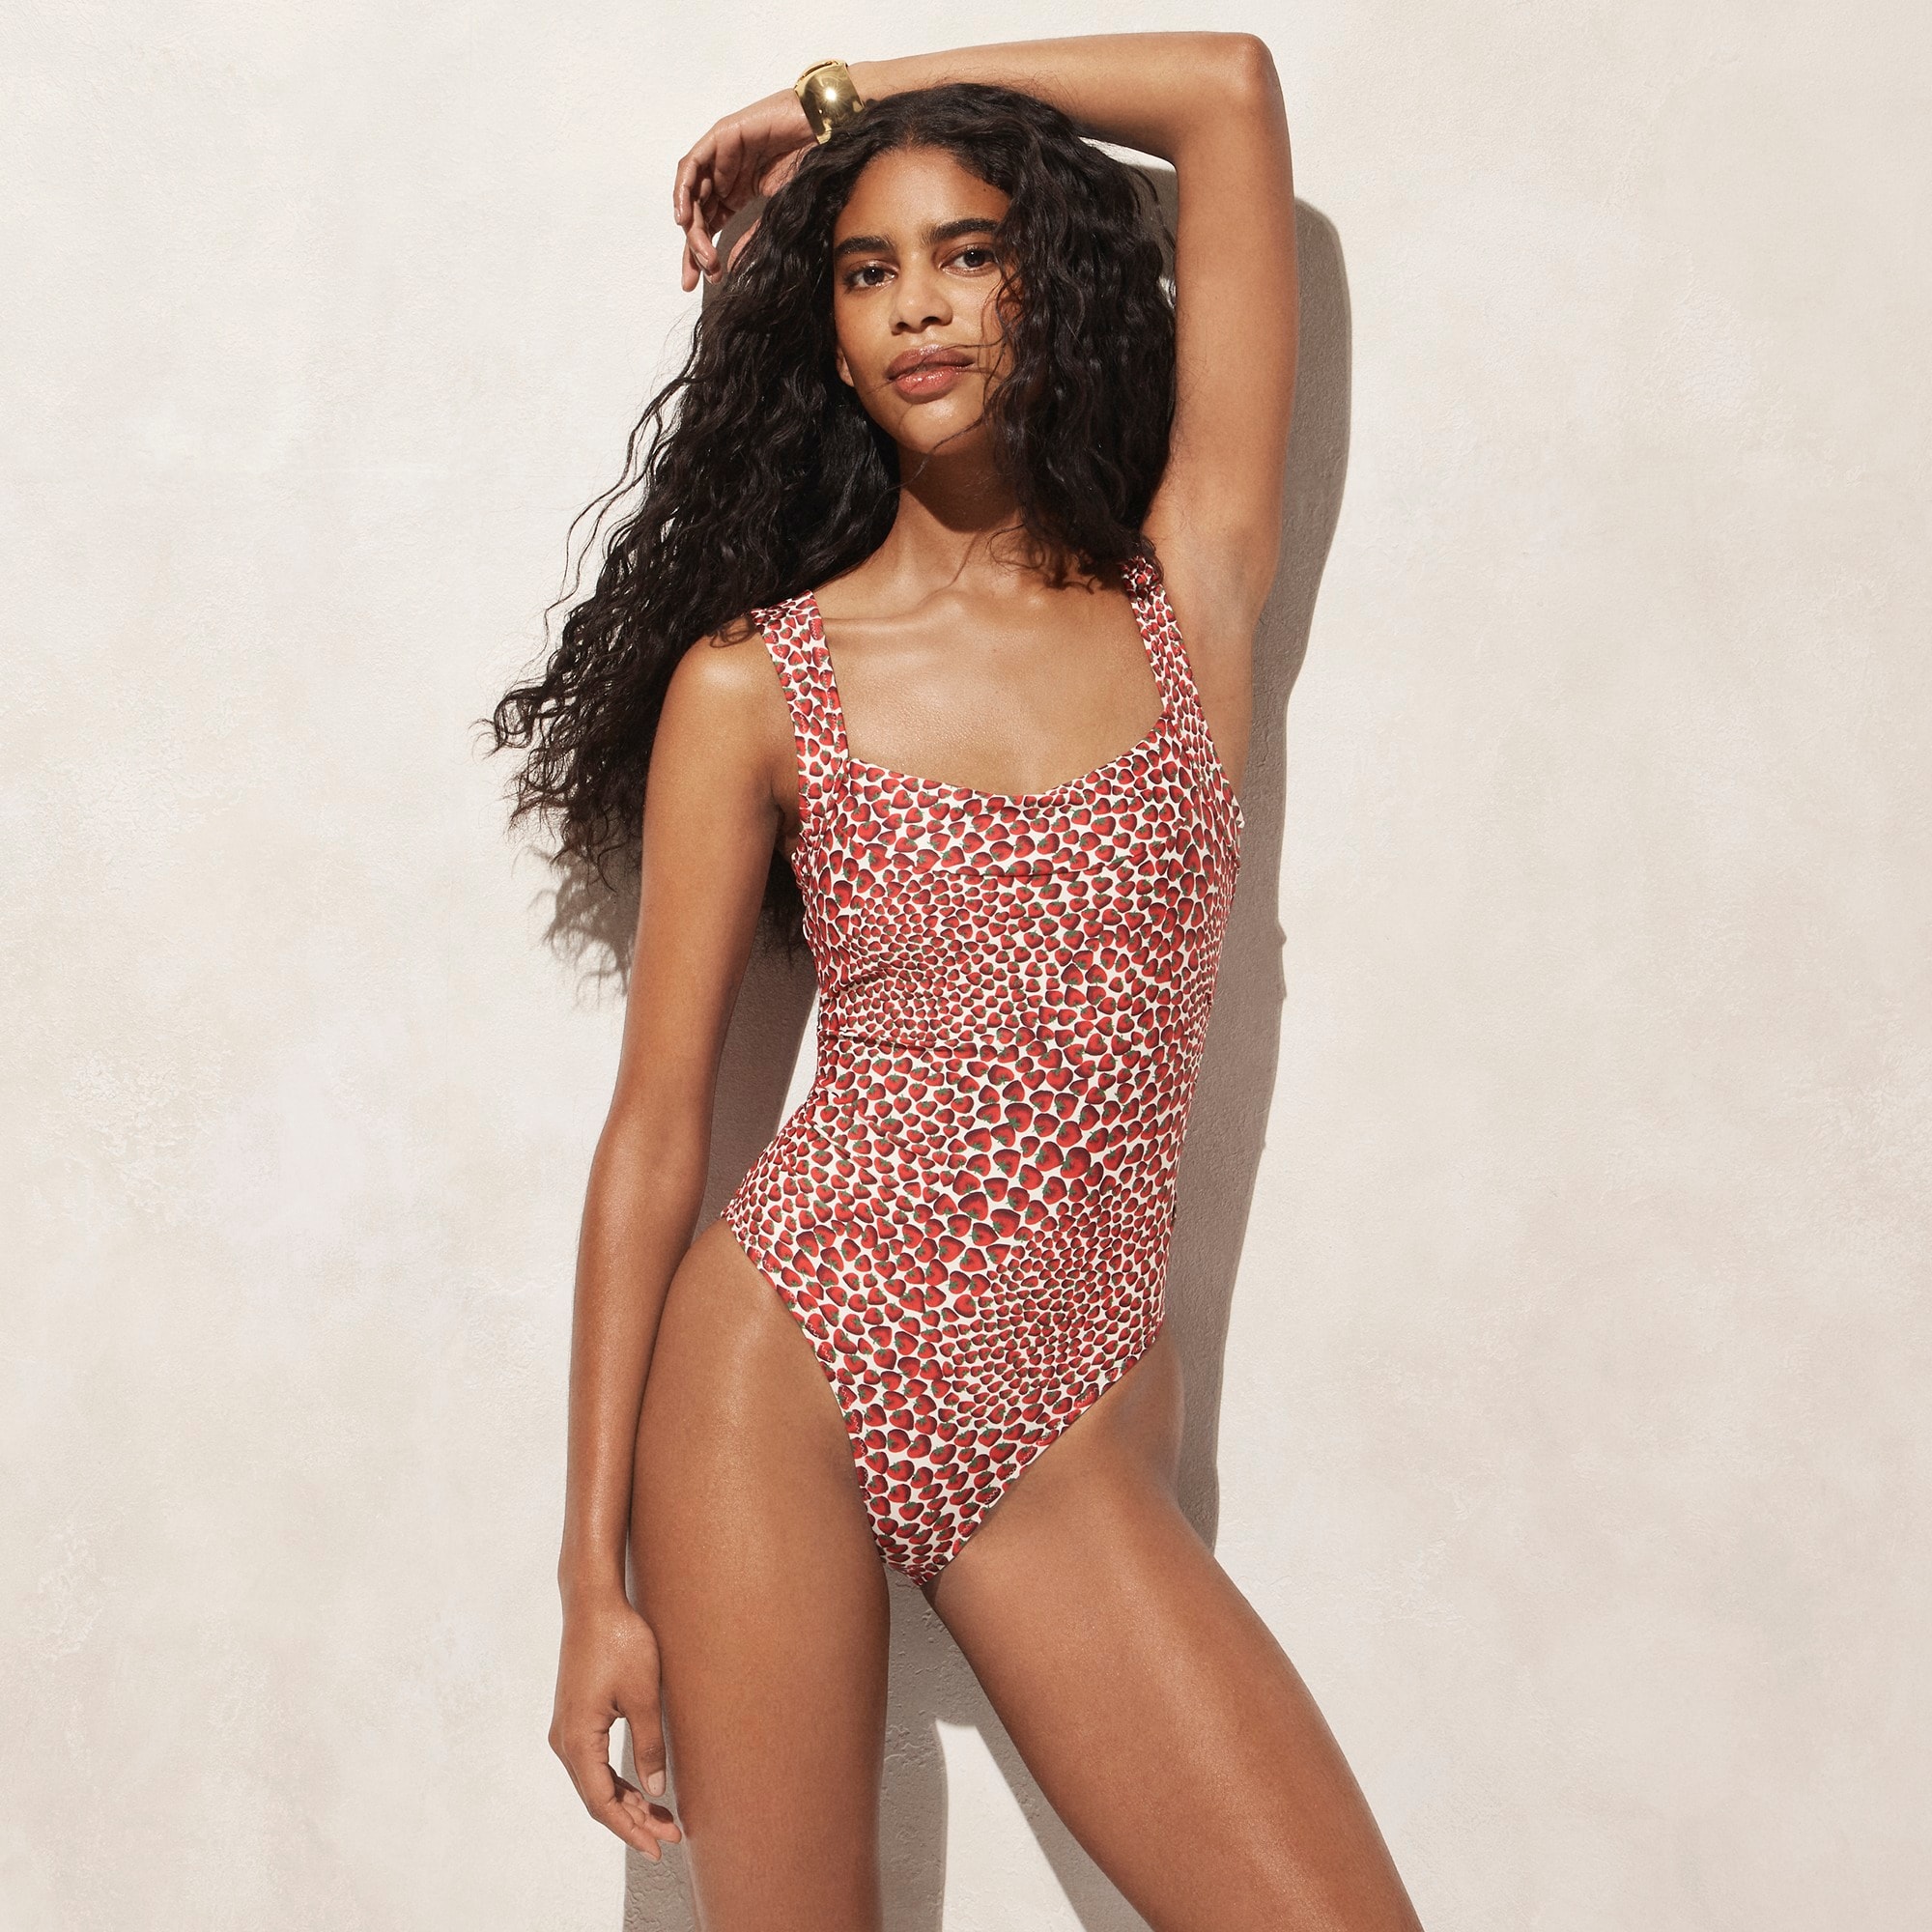  Long-torso ruched squareneck one-piece swimsuit in strawberry swirl print